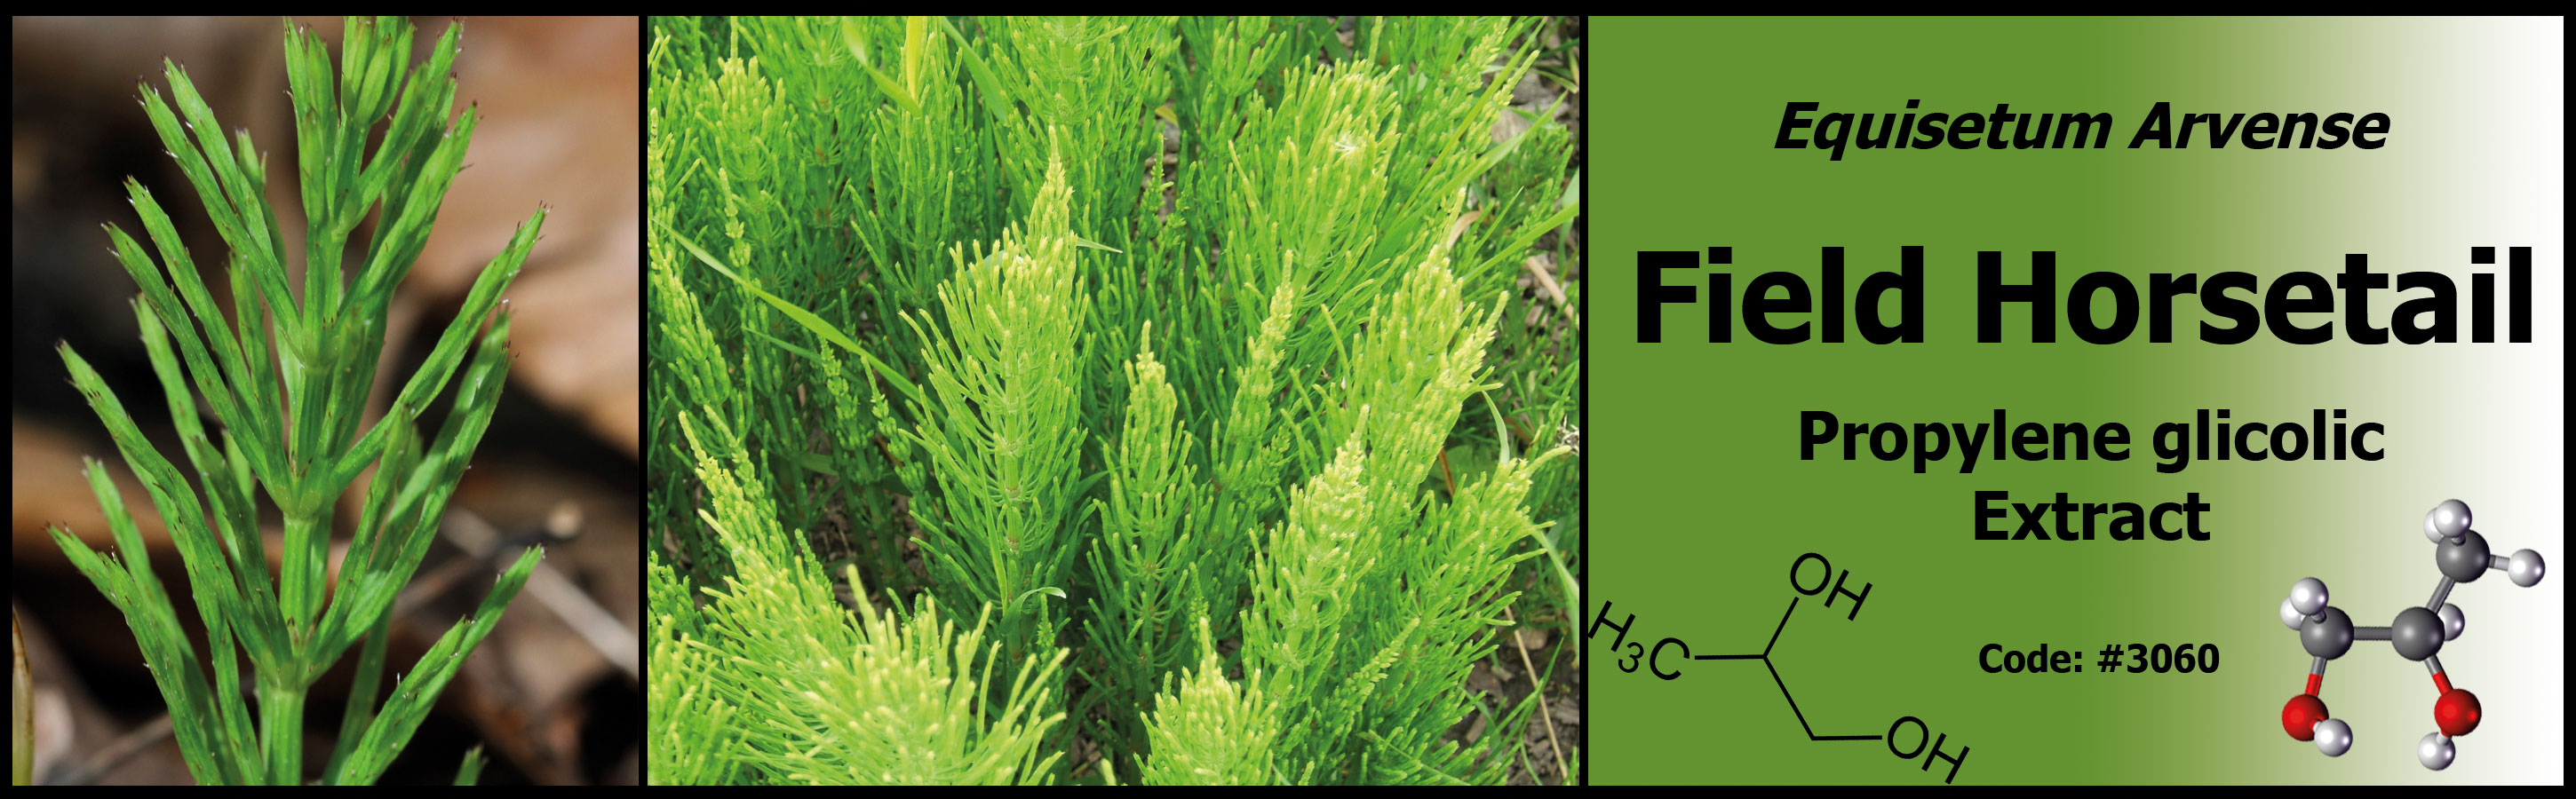 3060_Field-Horsetail-PG-Extract